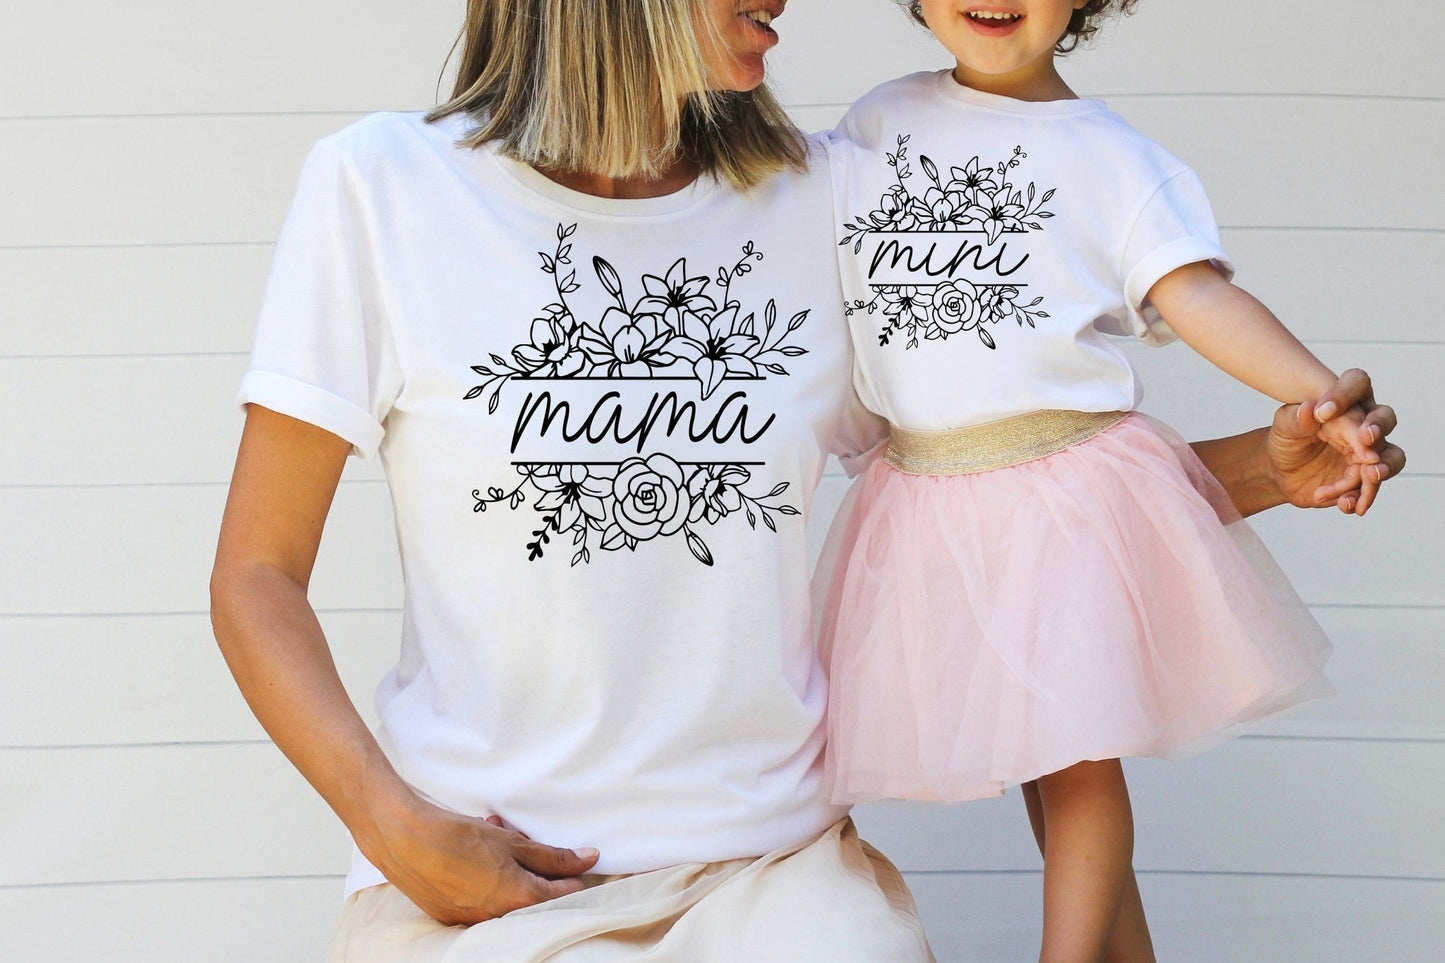 Personalized Mommy and Me Shirts Matching Mama and Girl Shirt Wildflower Mothers Day Gift Mothers Day Shirts for Mom Child and Baby - Squishy Cheeks